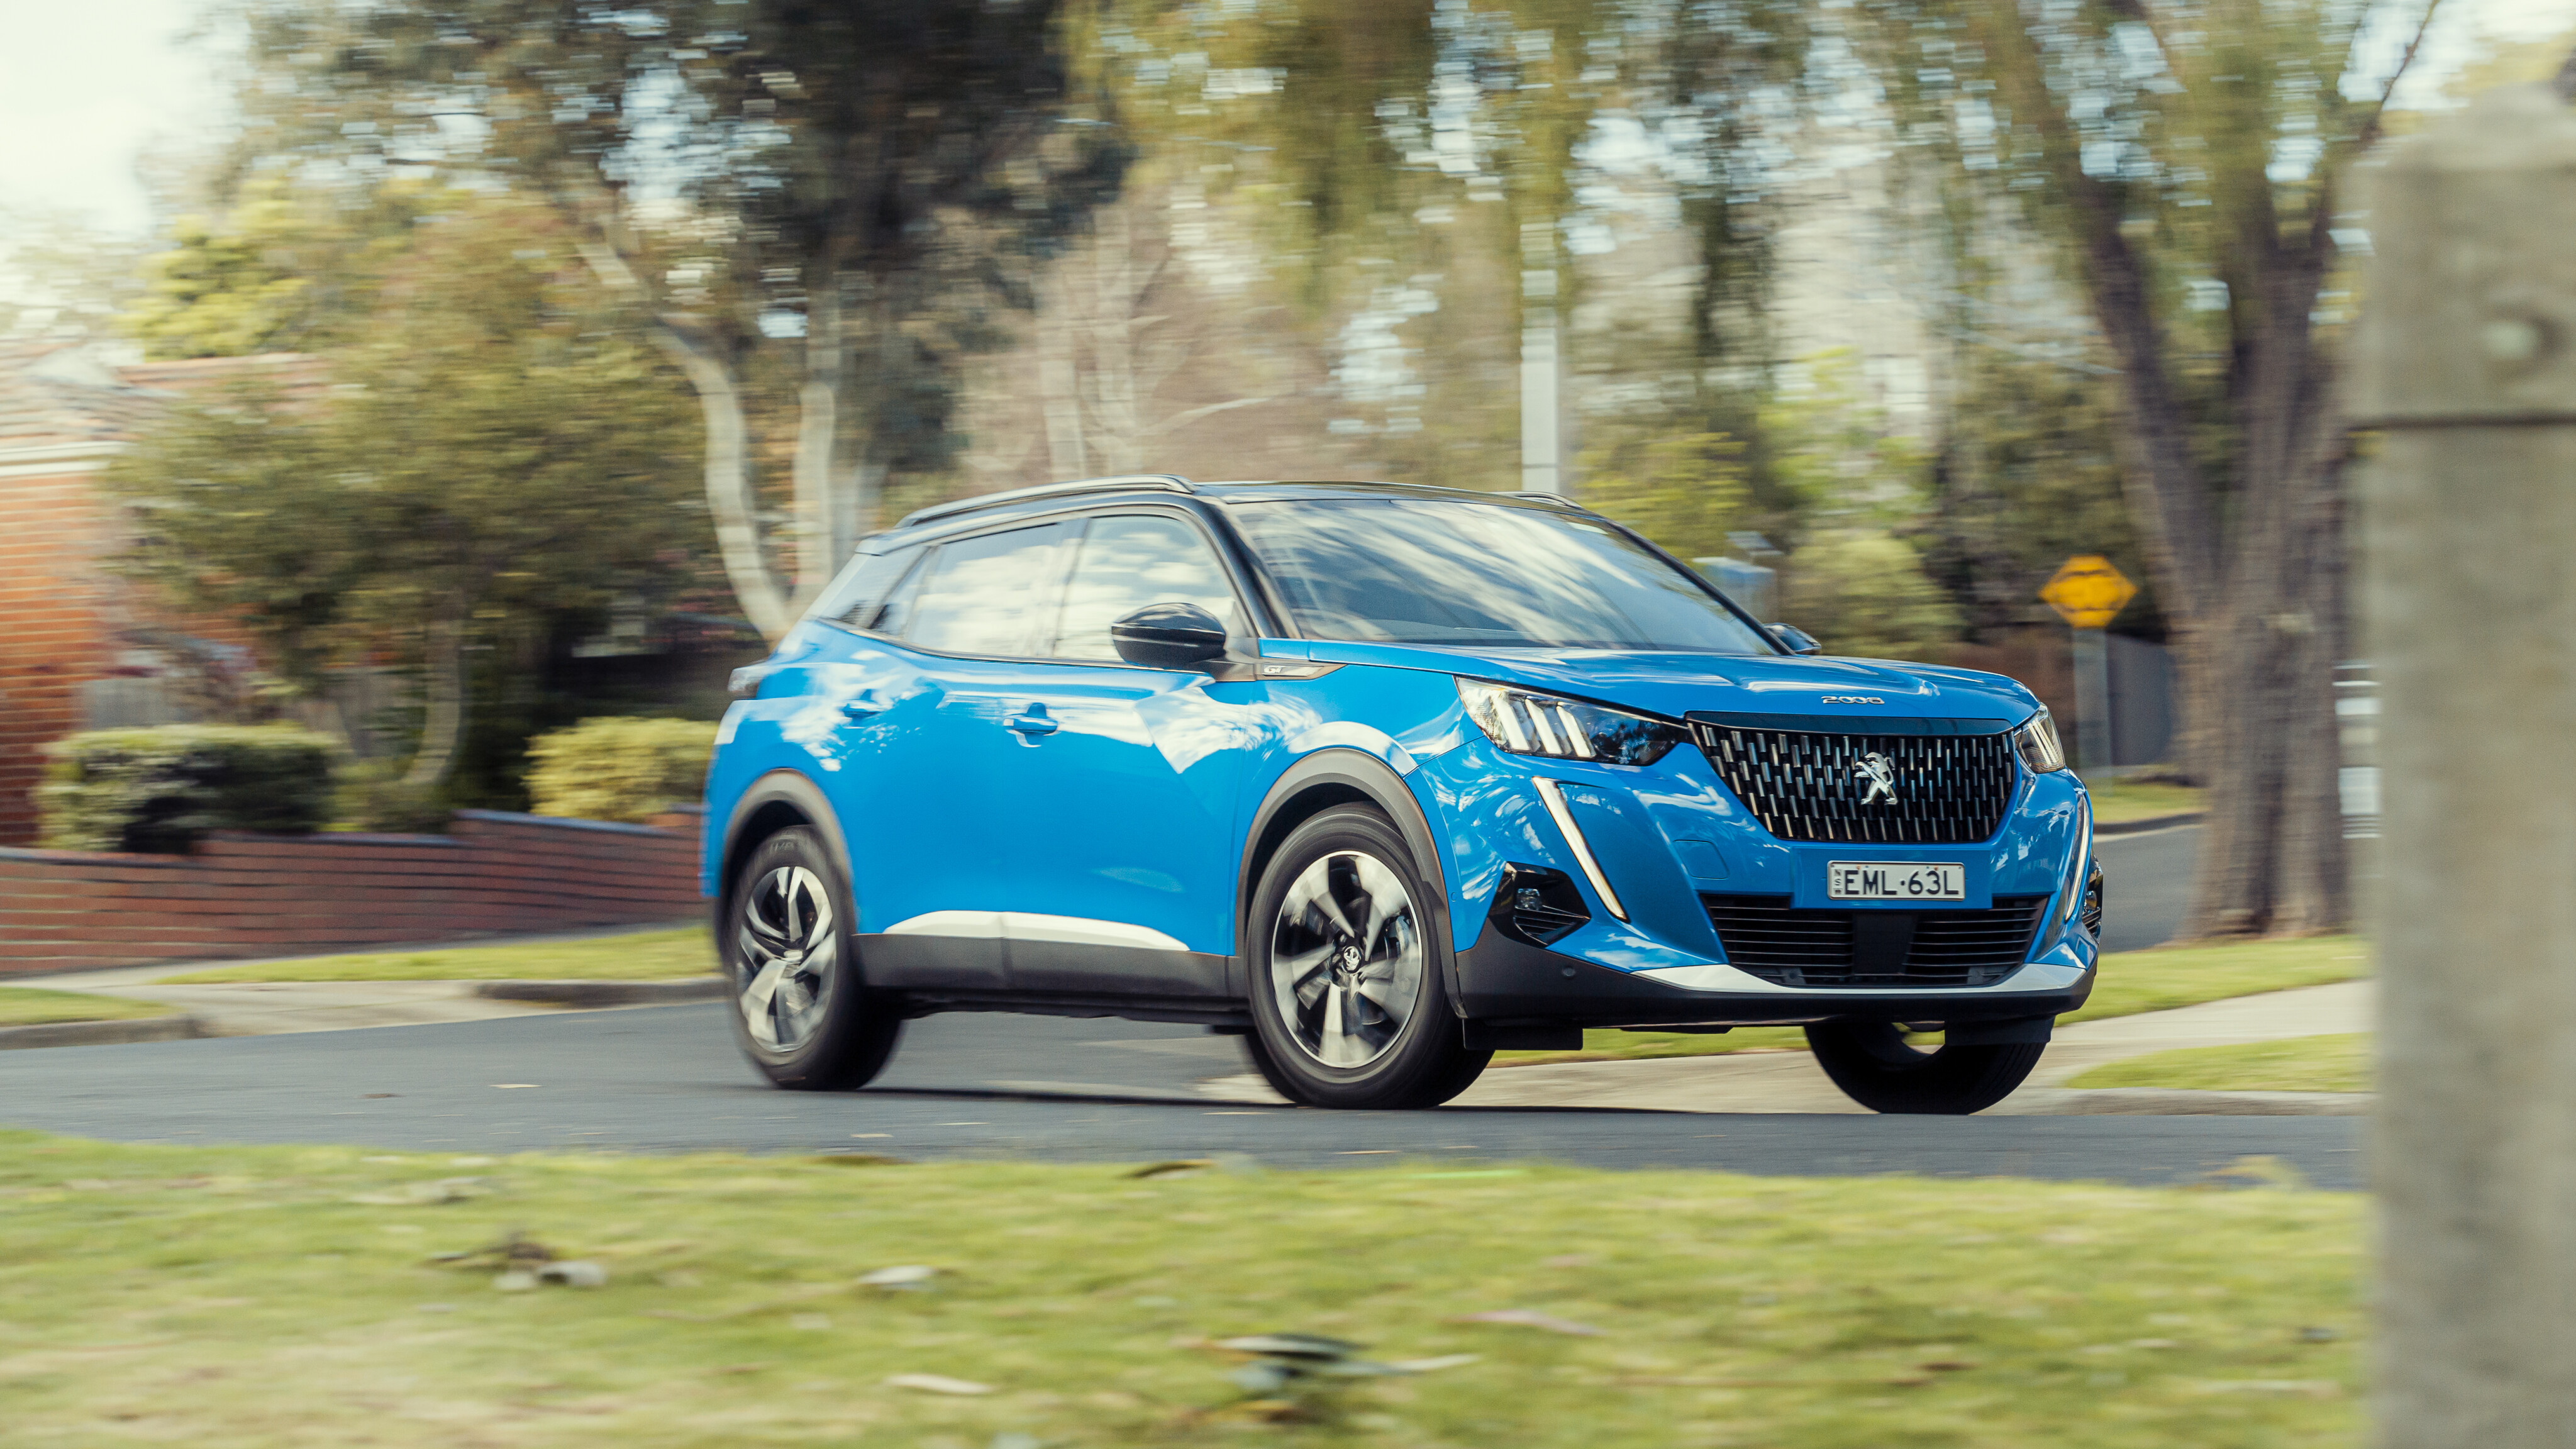 Peugeot 2008 News and Reviews